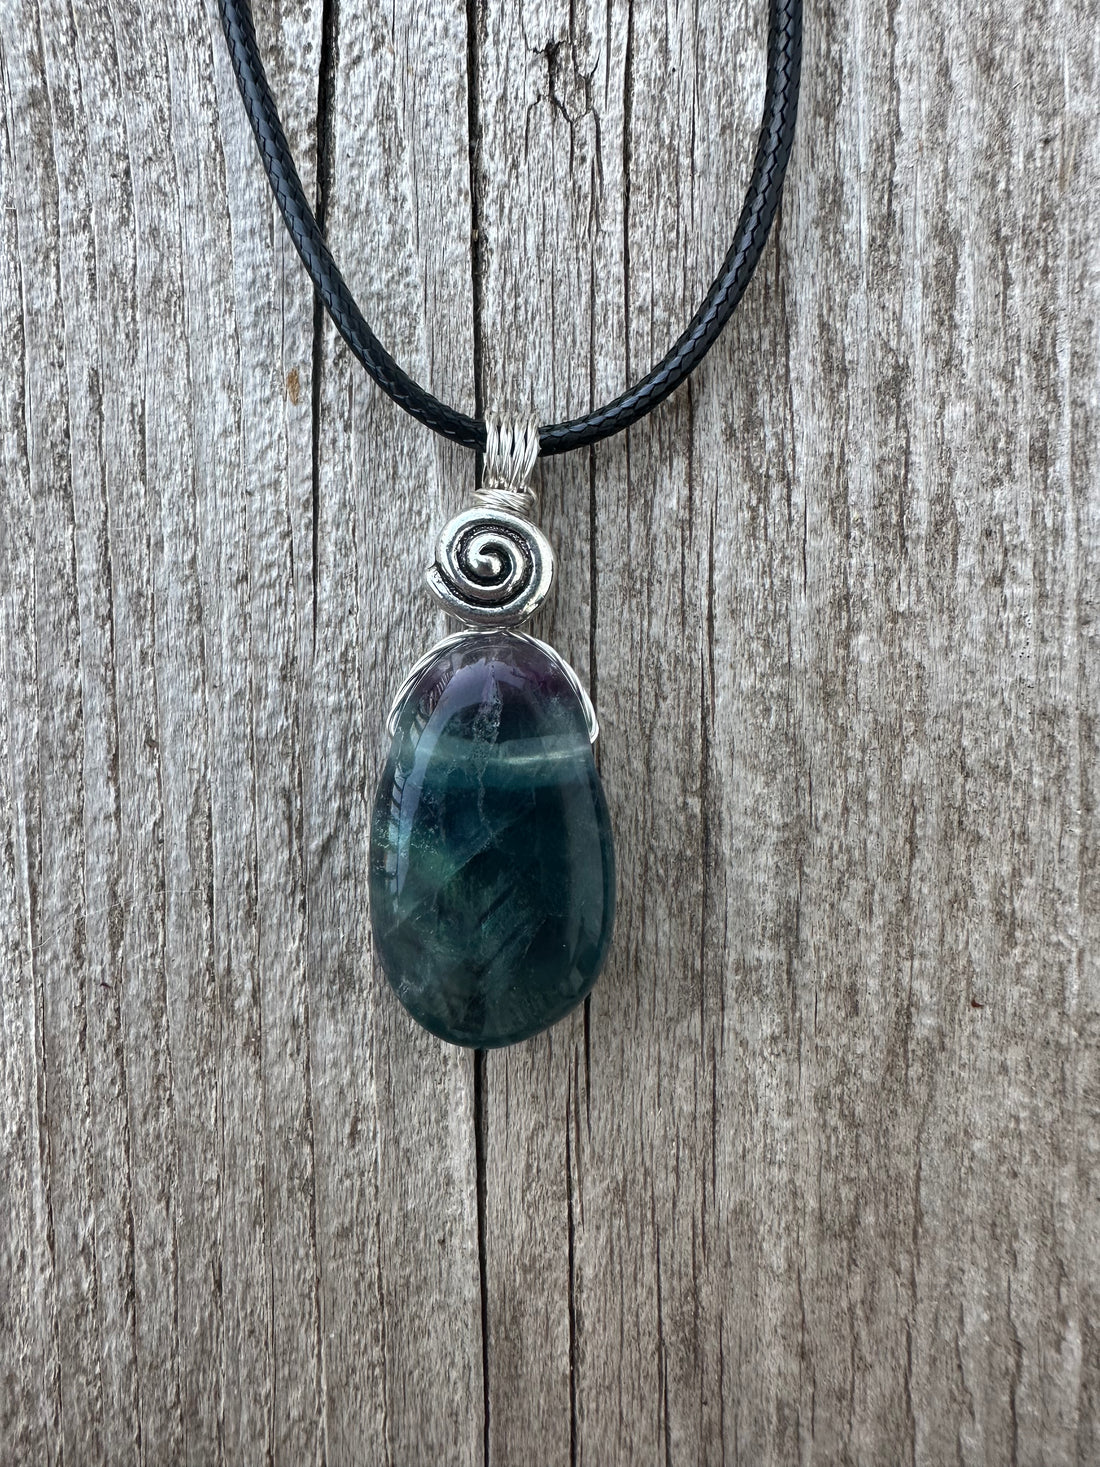 Fluorite Necklace for Protection, Spiritual Awakening, and Self-Confidence. Swirl to Signify Consciousness.